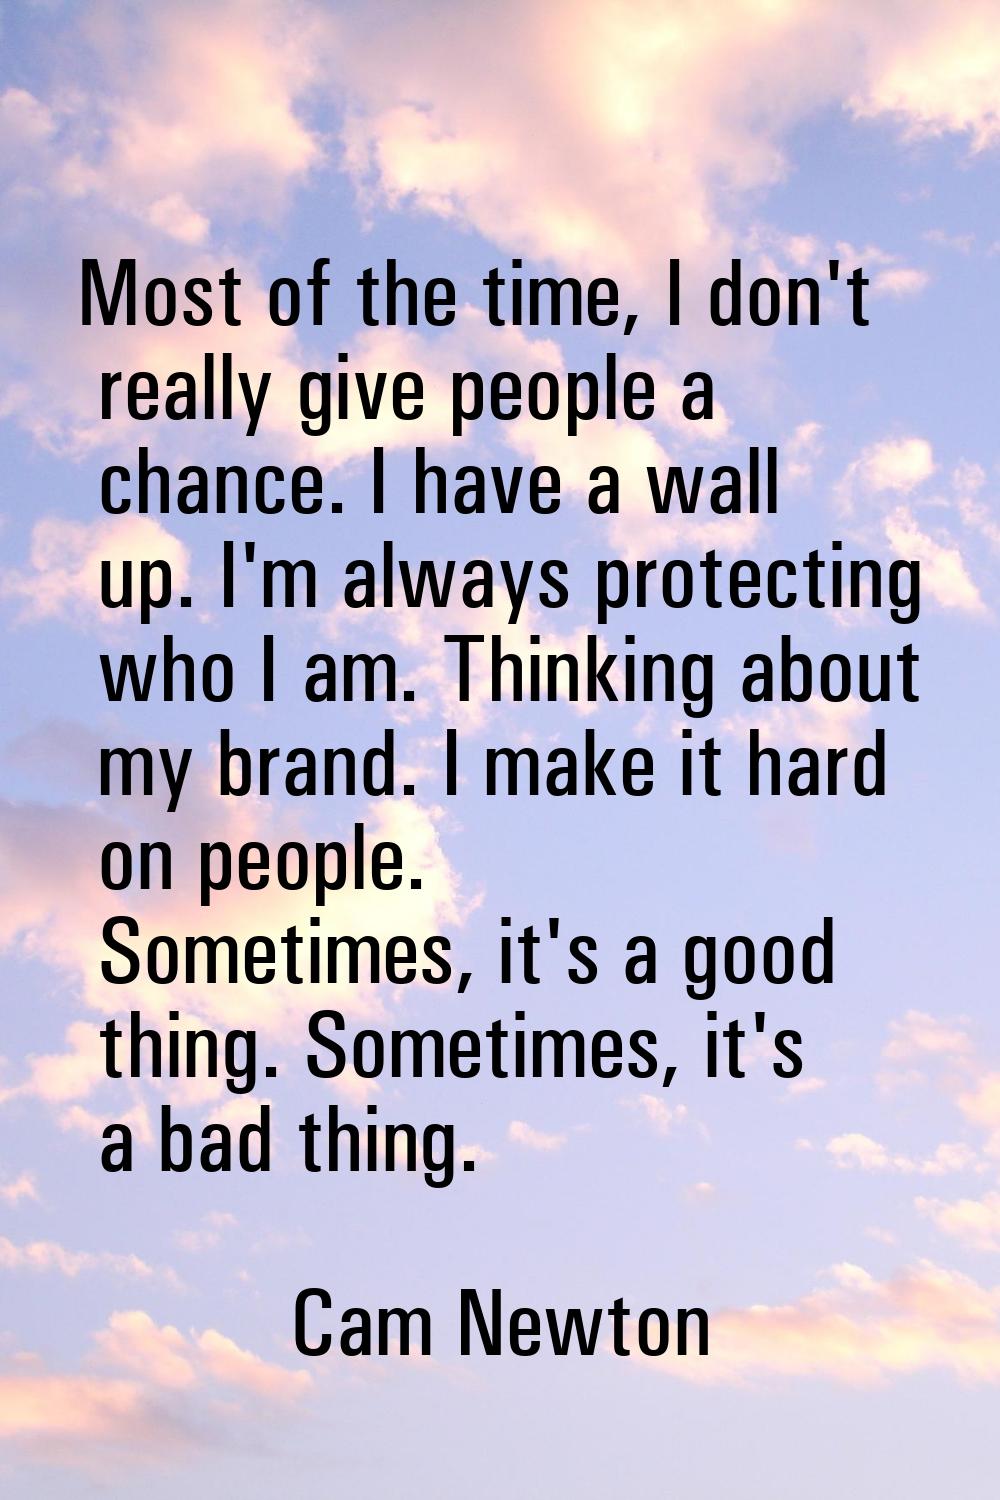 Most of the time, I don't really give people a chance. I have a wall up. I'm always protecting who 